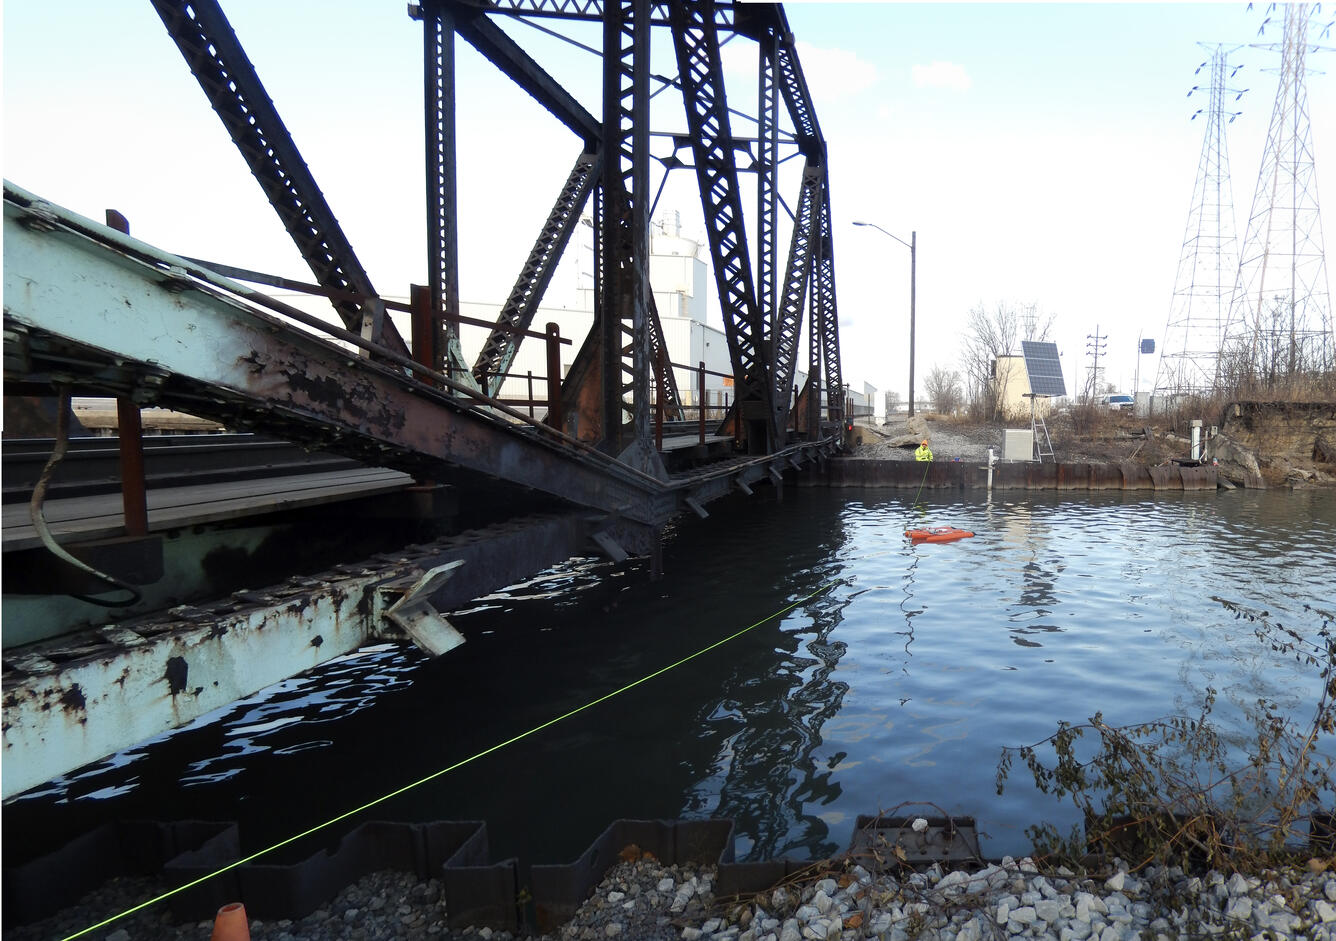 Indiana Harbor Canal at East Chicago, IN  ADCP measurement